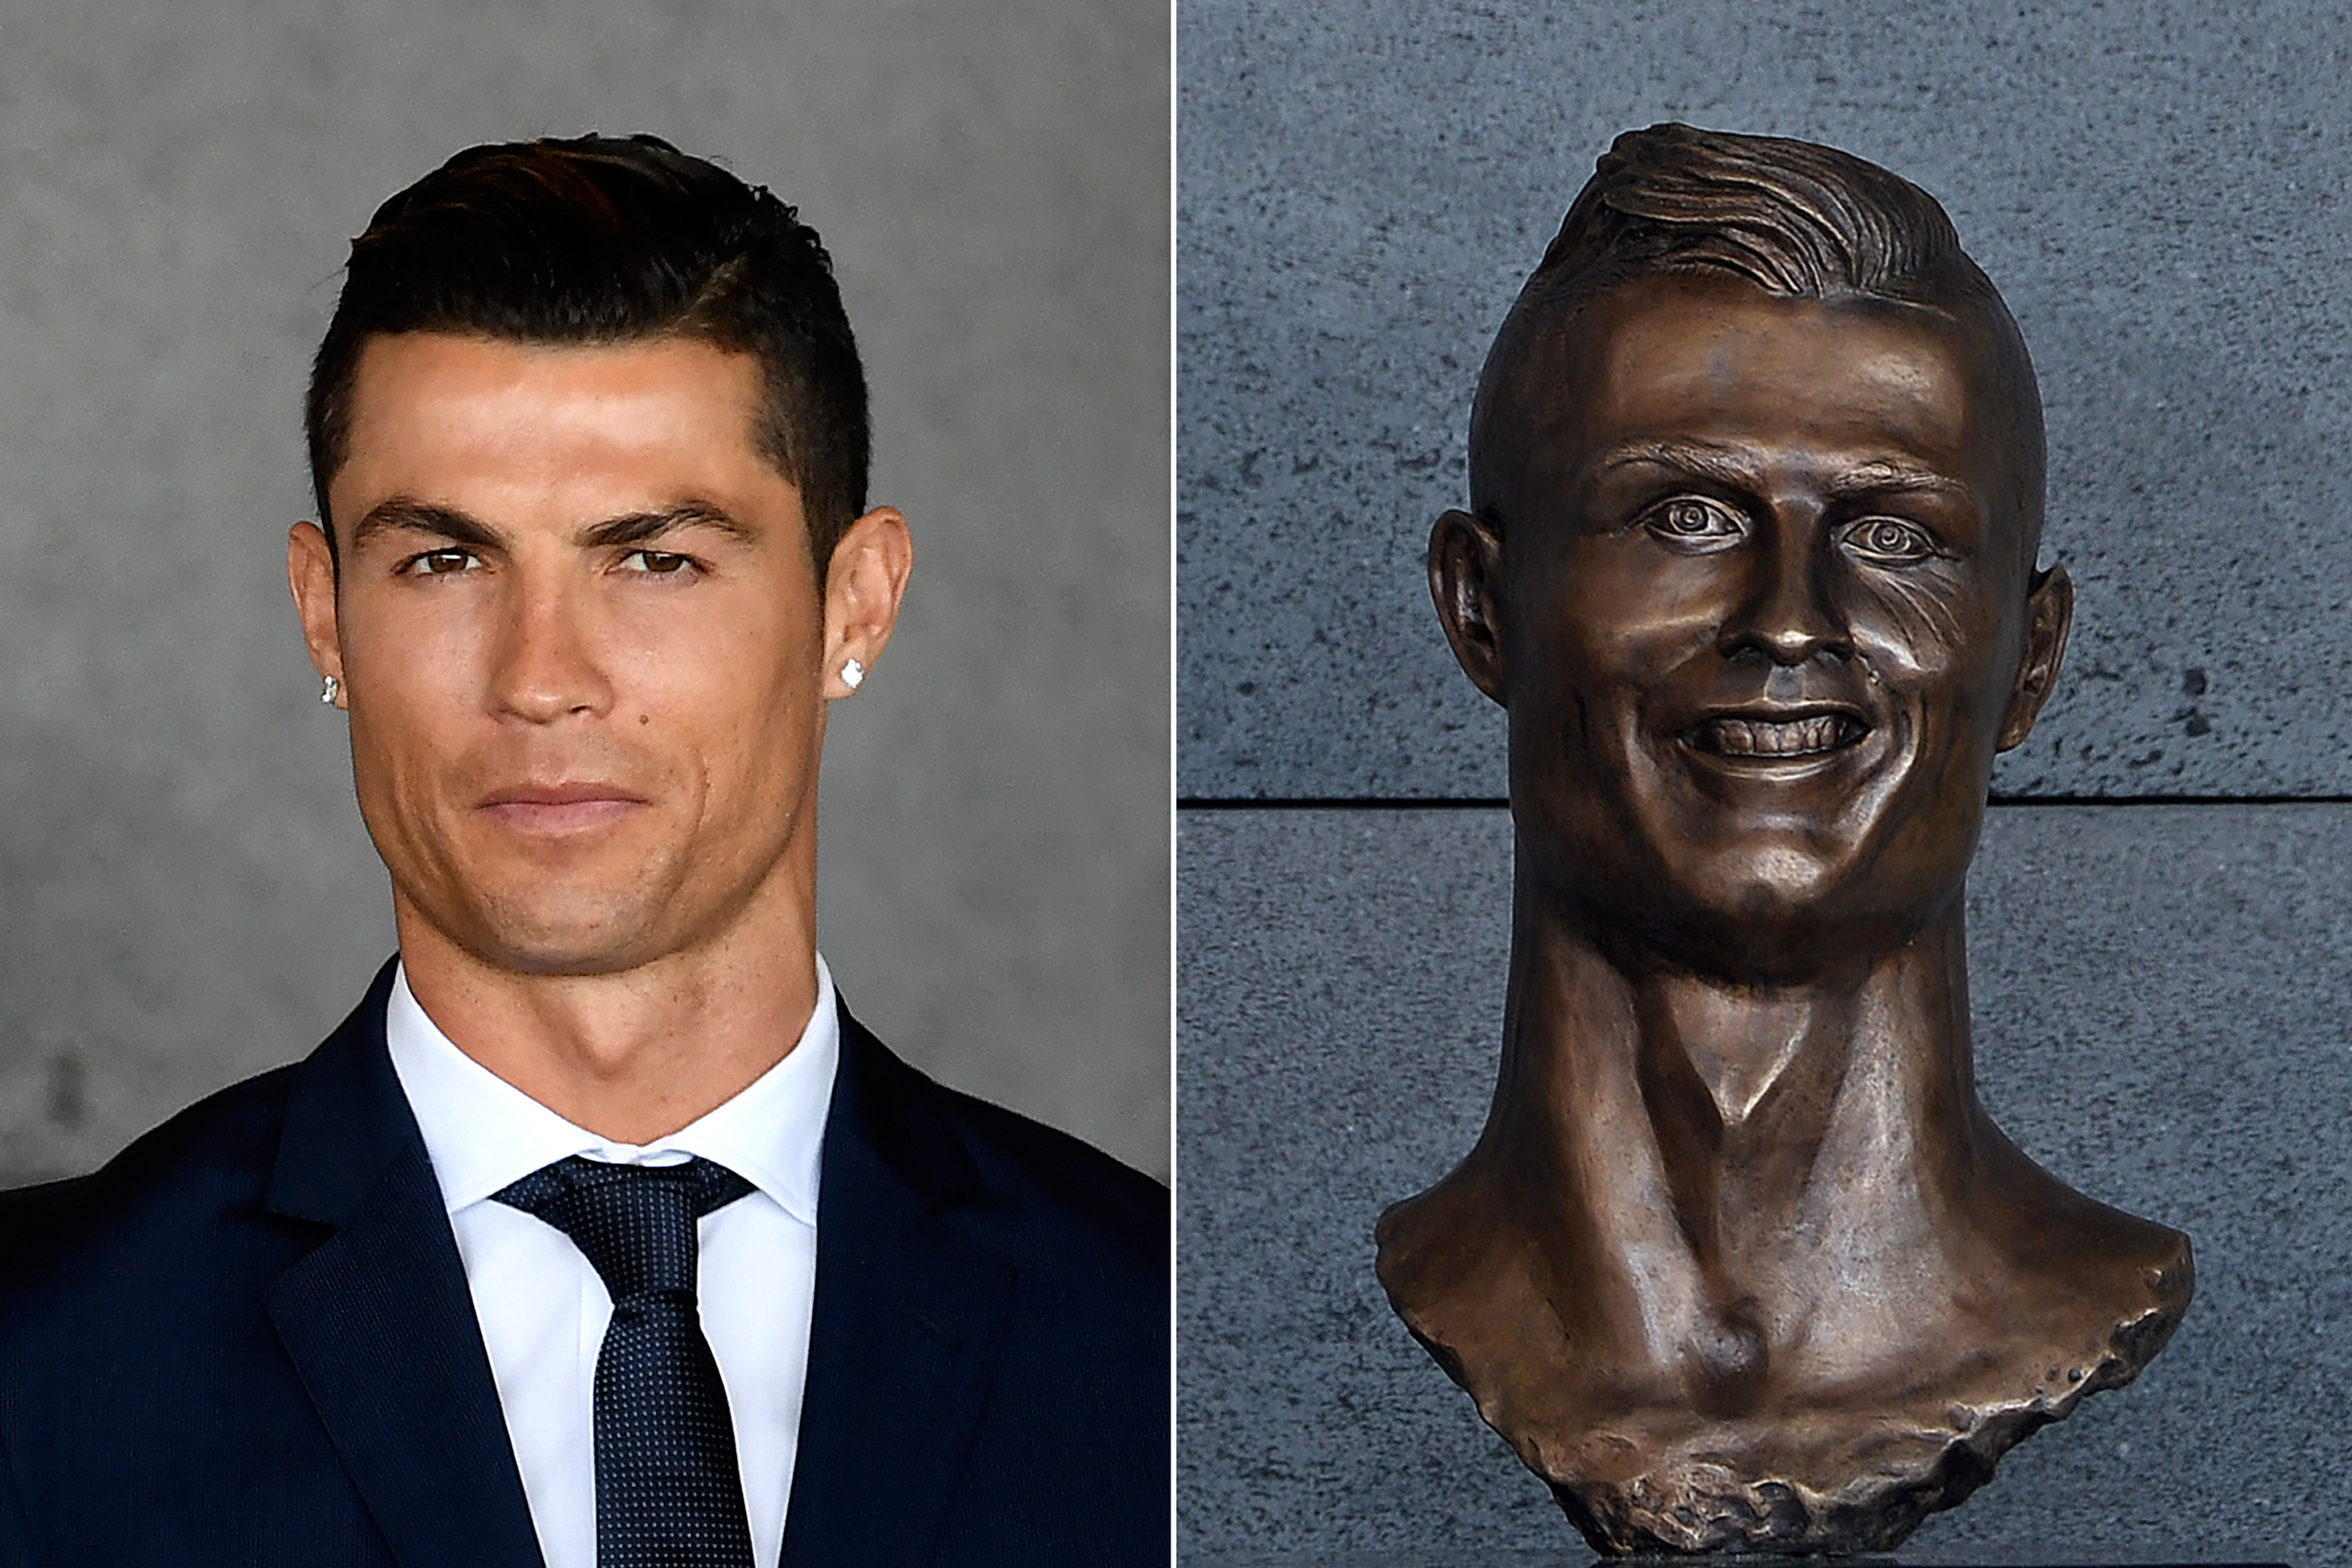 Portuguese footballer Cristiano Ronaldo stands near a bust of his likeness during a ceremony to rename Madeira's airport after him on March 29, 2017. Right: The bust that was revealed. (Francisco Leong—AFP/Getty Images; Octavio Passos—Getty Images)